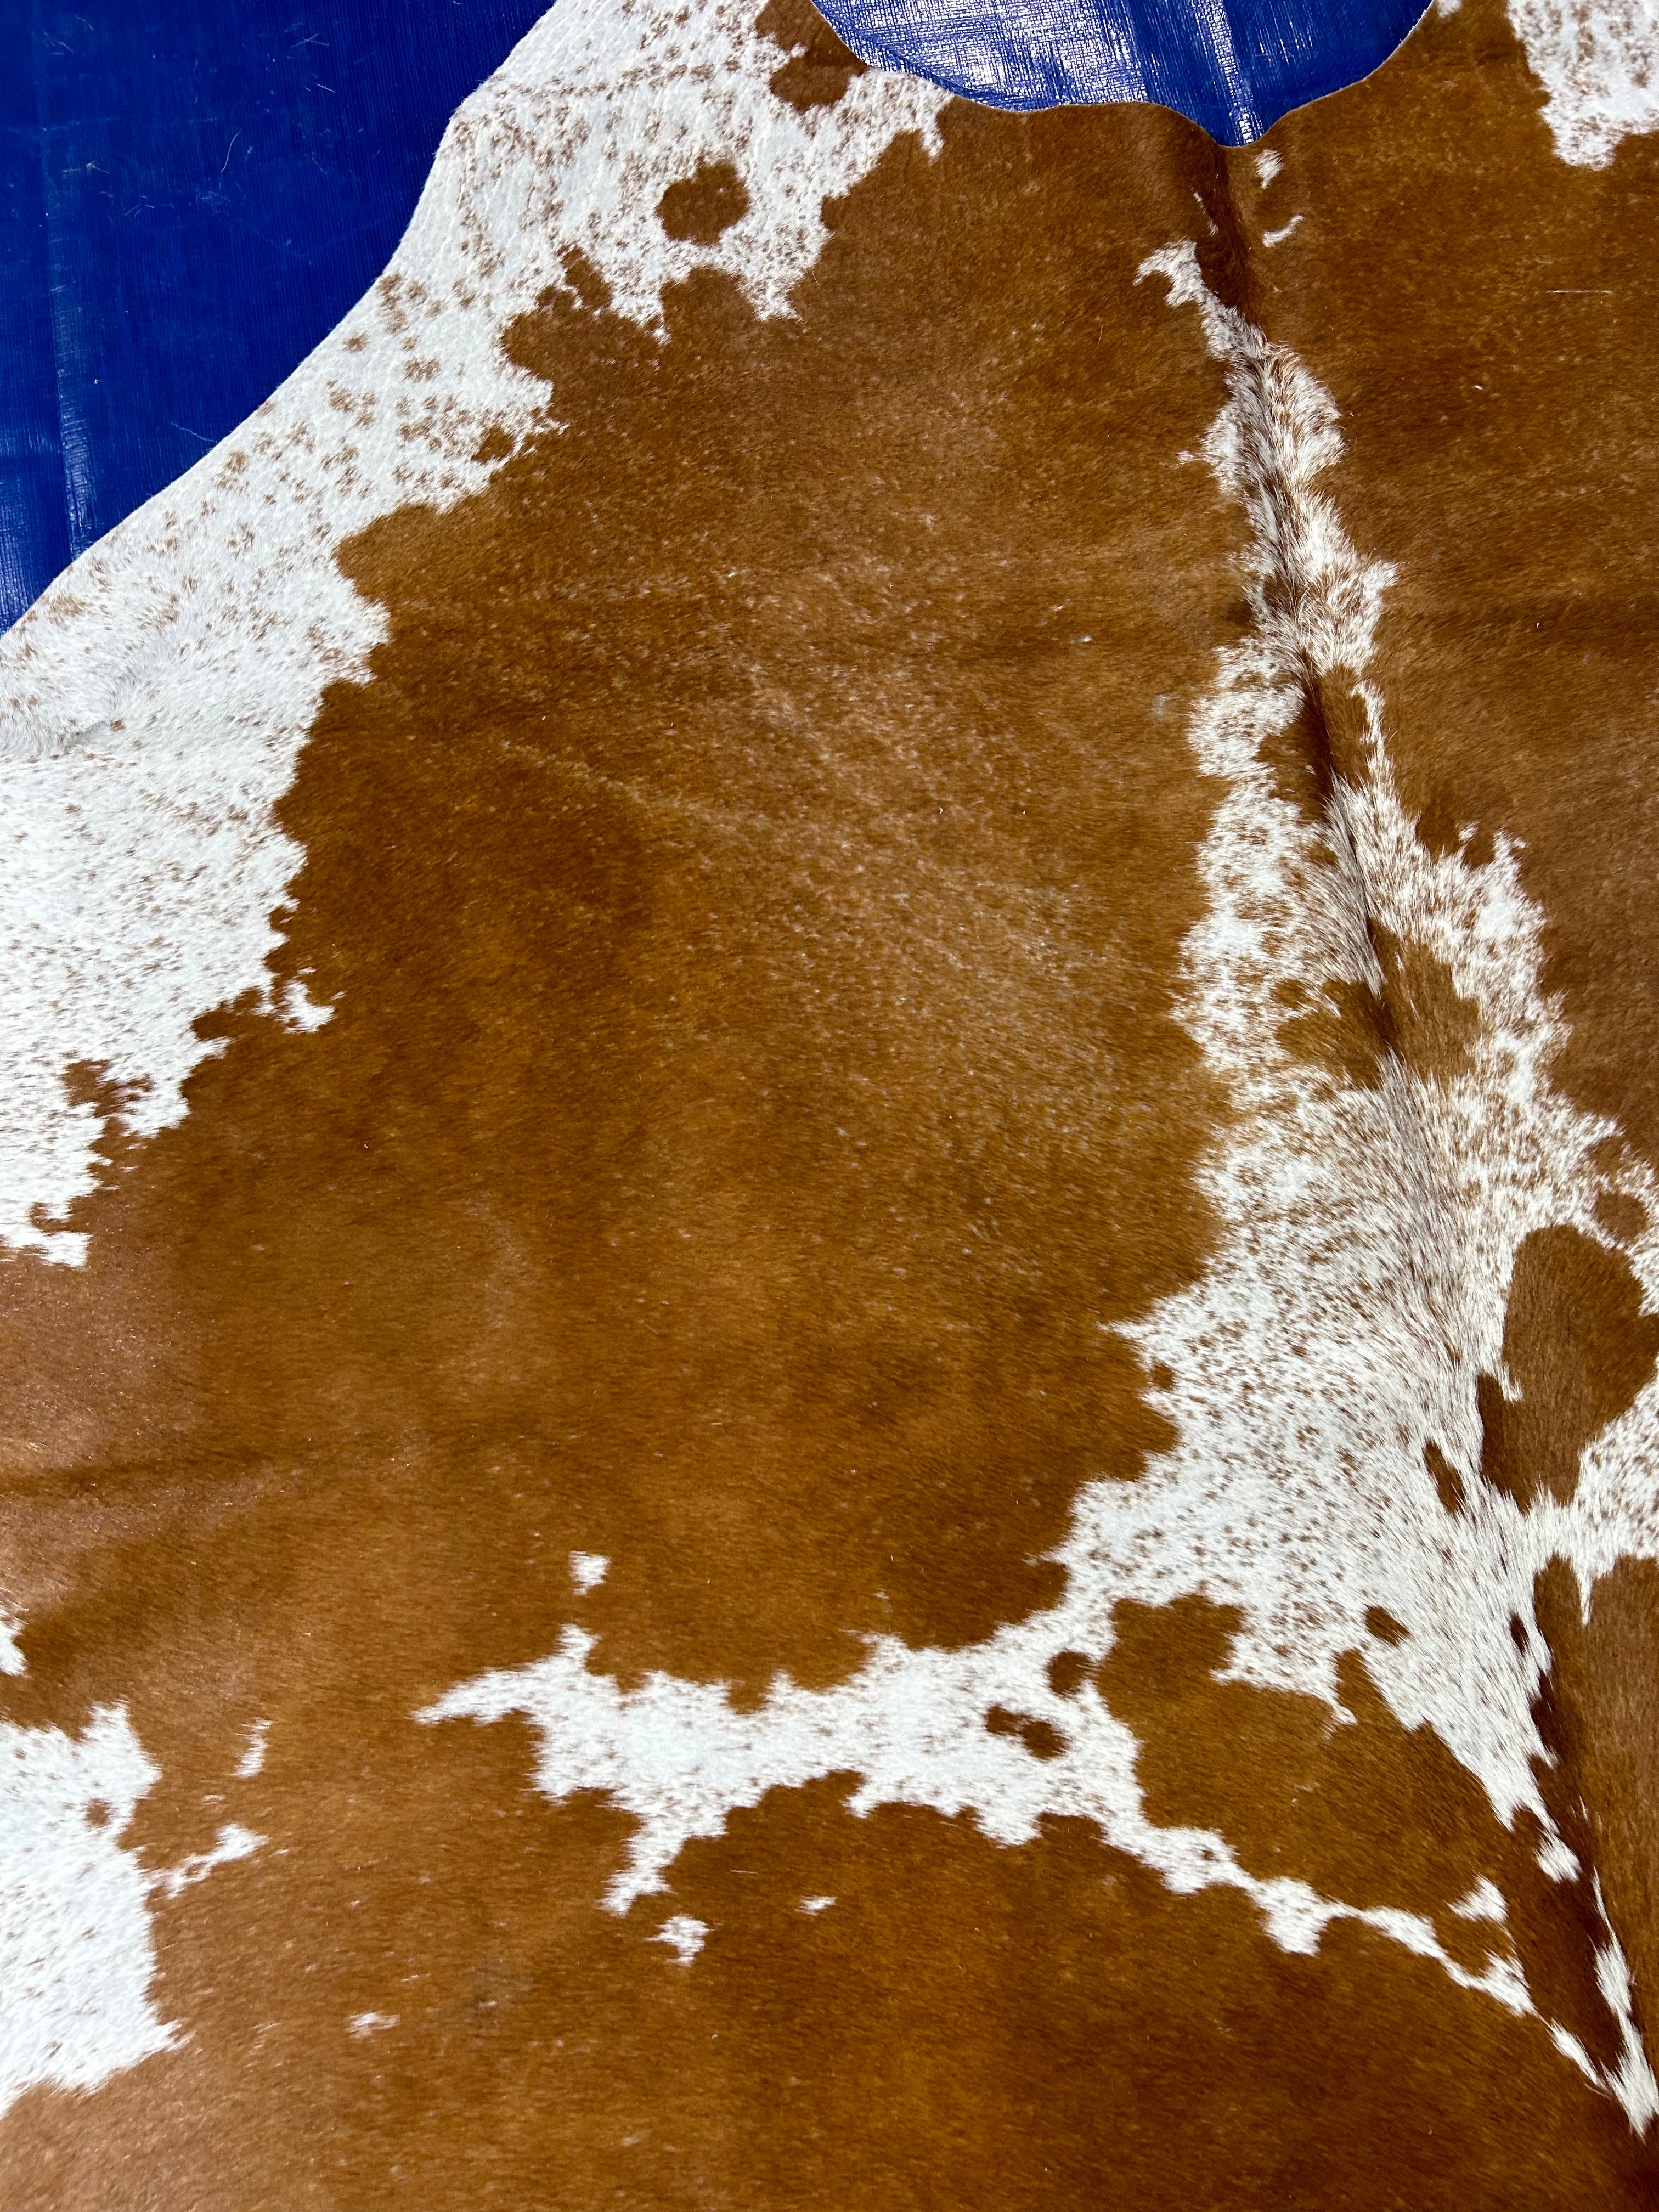 Hereford Cowhide Rug (1 patch/ fire brand) Size: 7x6.7 feet M-1648